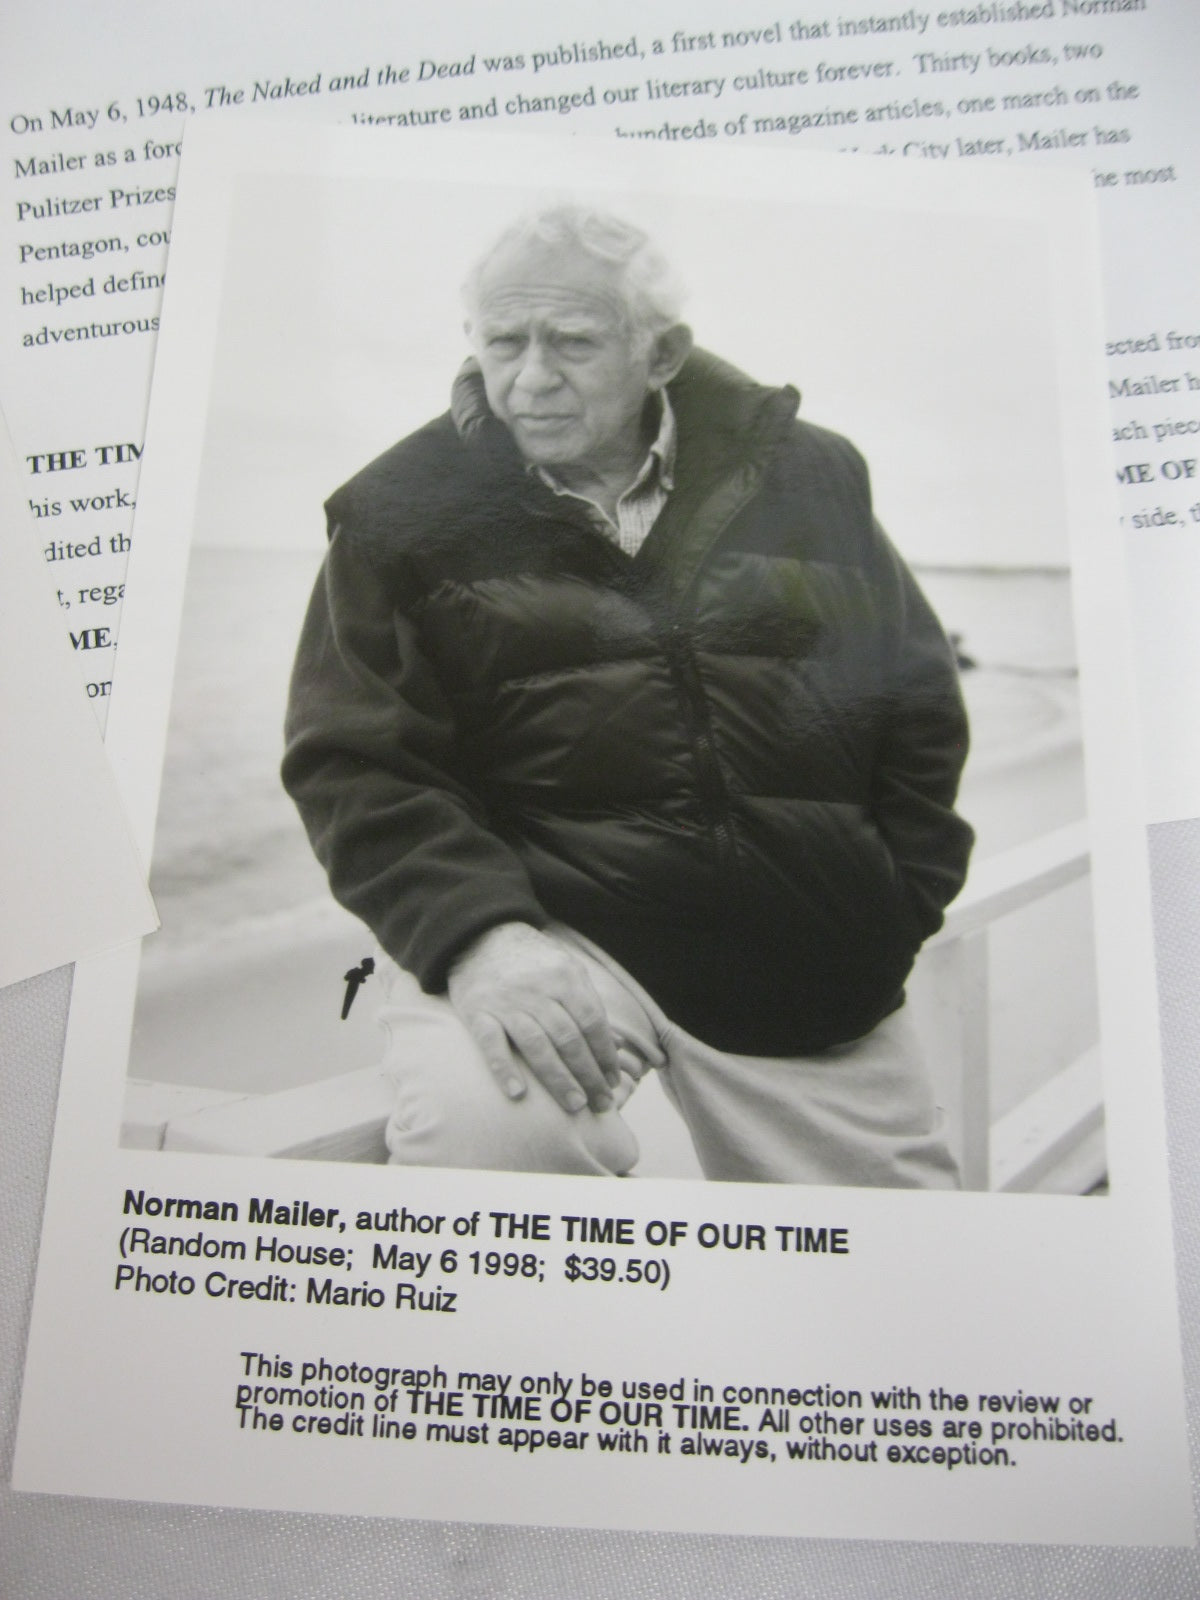 The Time of Our Time by Norman Mailer